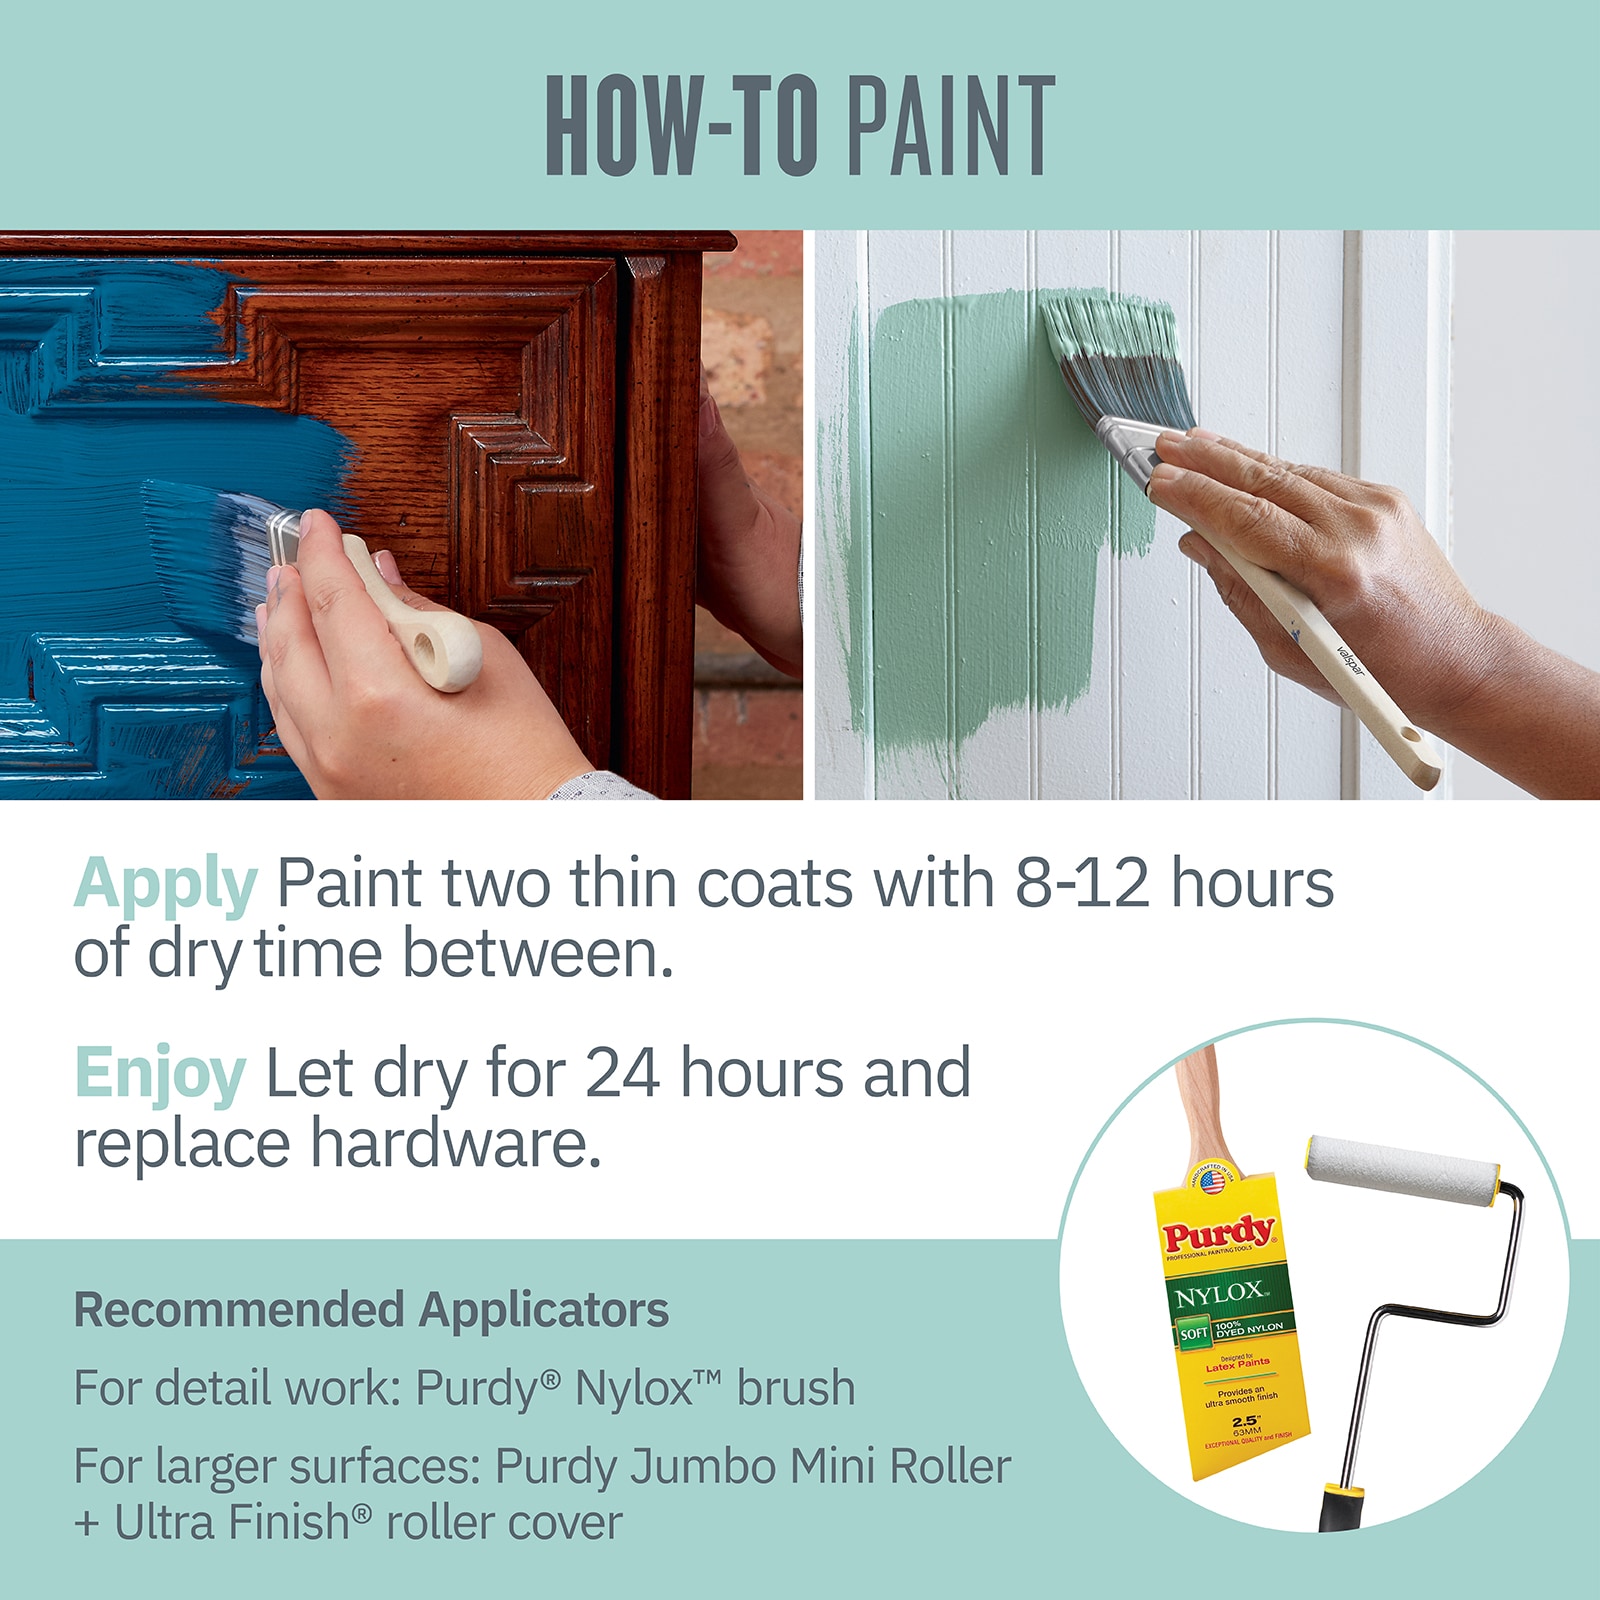 Valspar CI105 Baking Stone Precisely Matched For Paint and Spray Paint